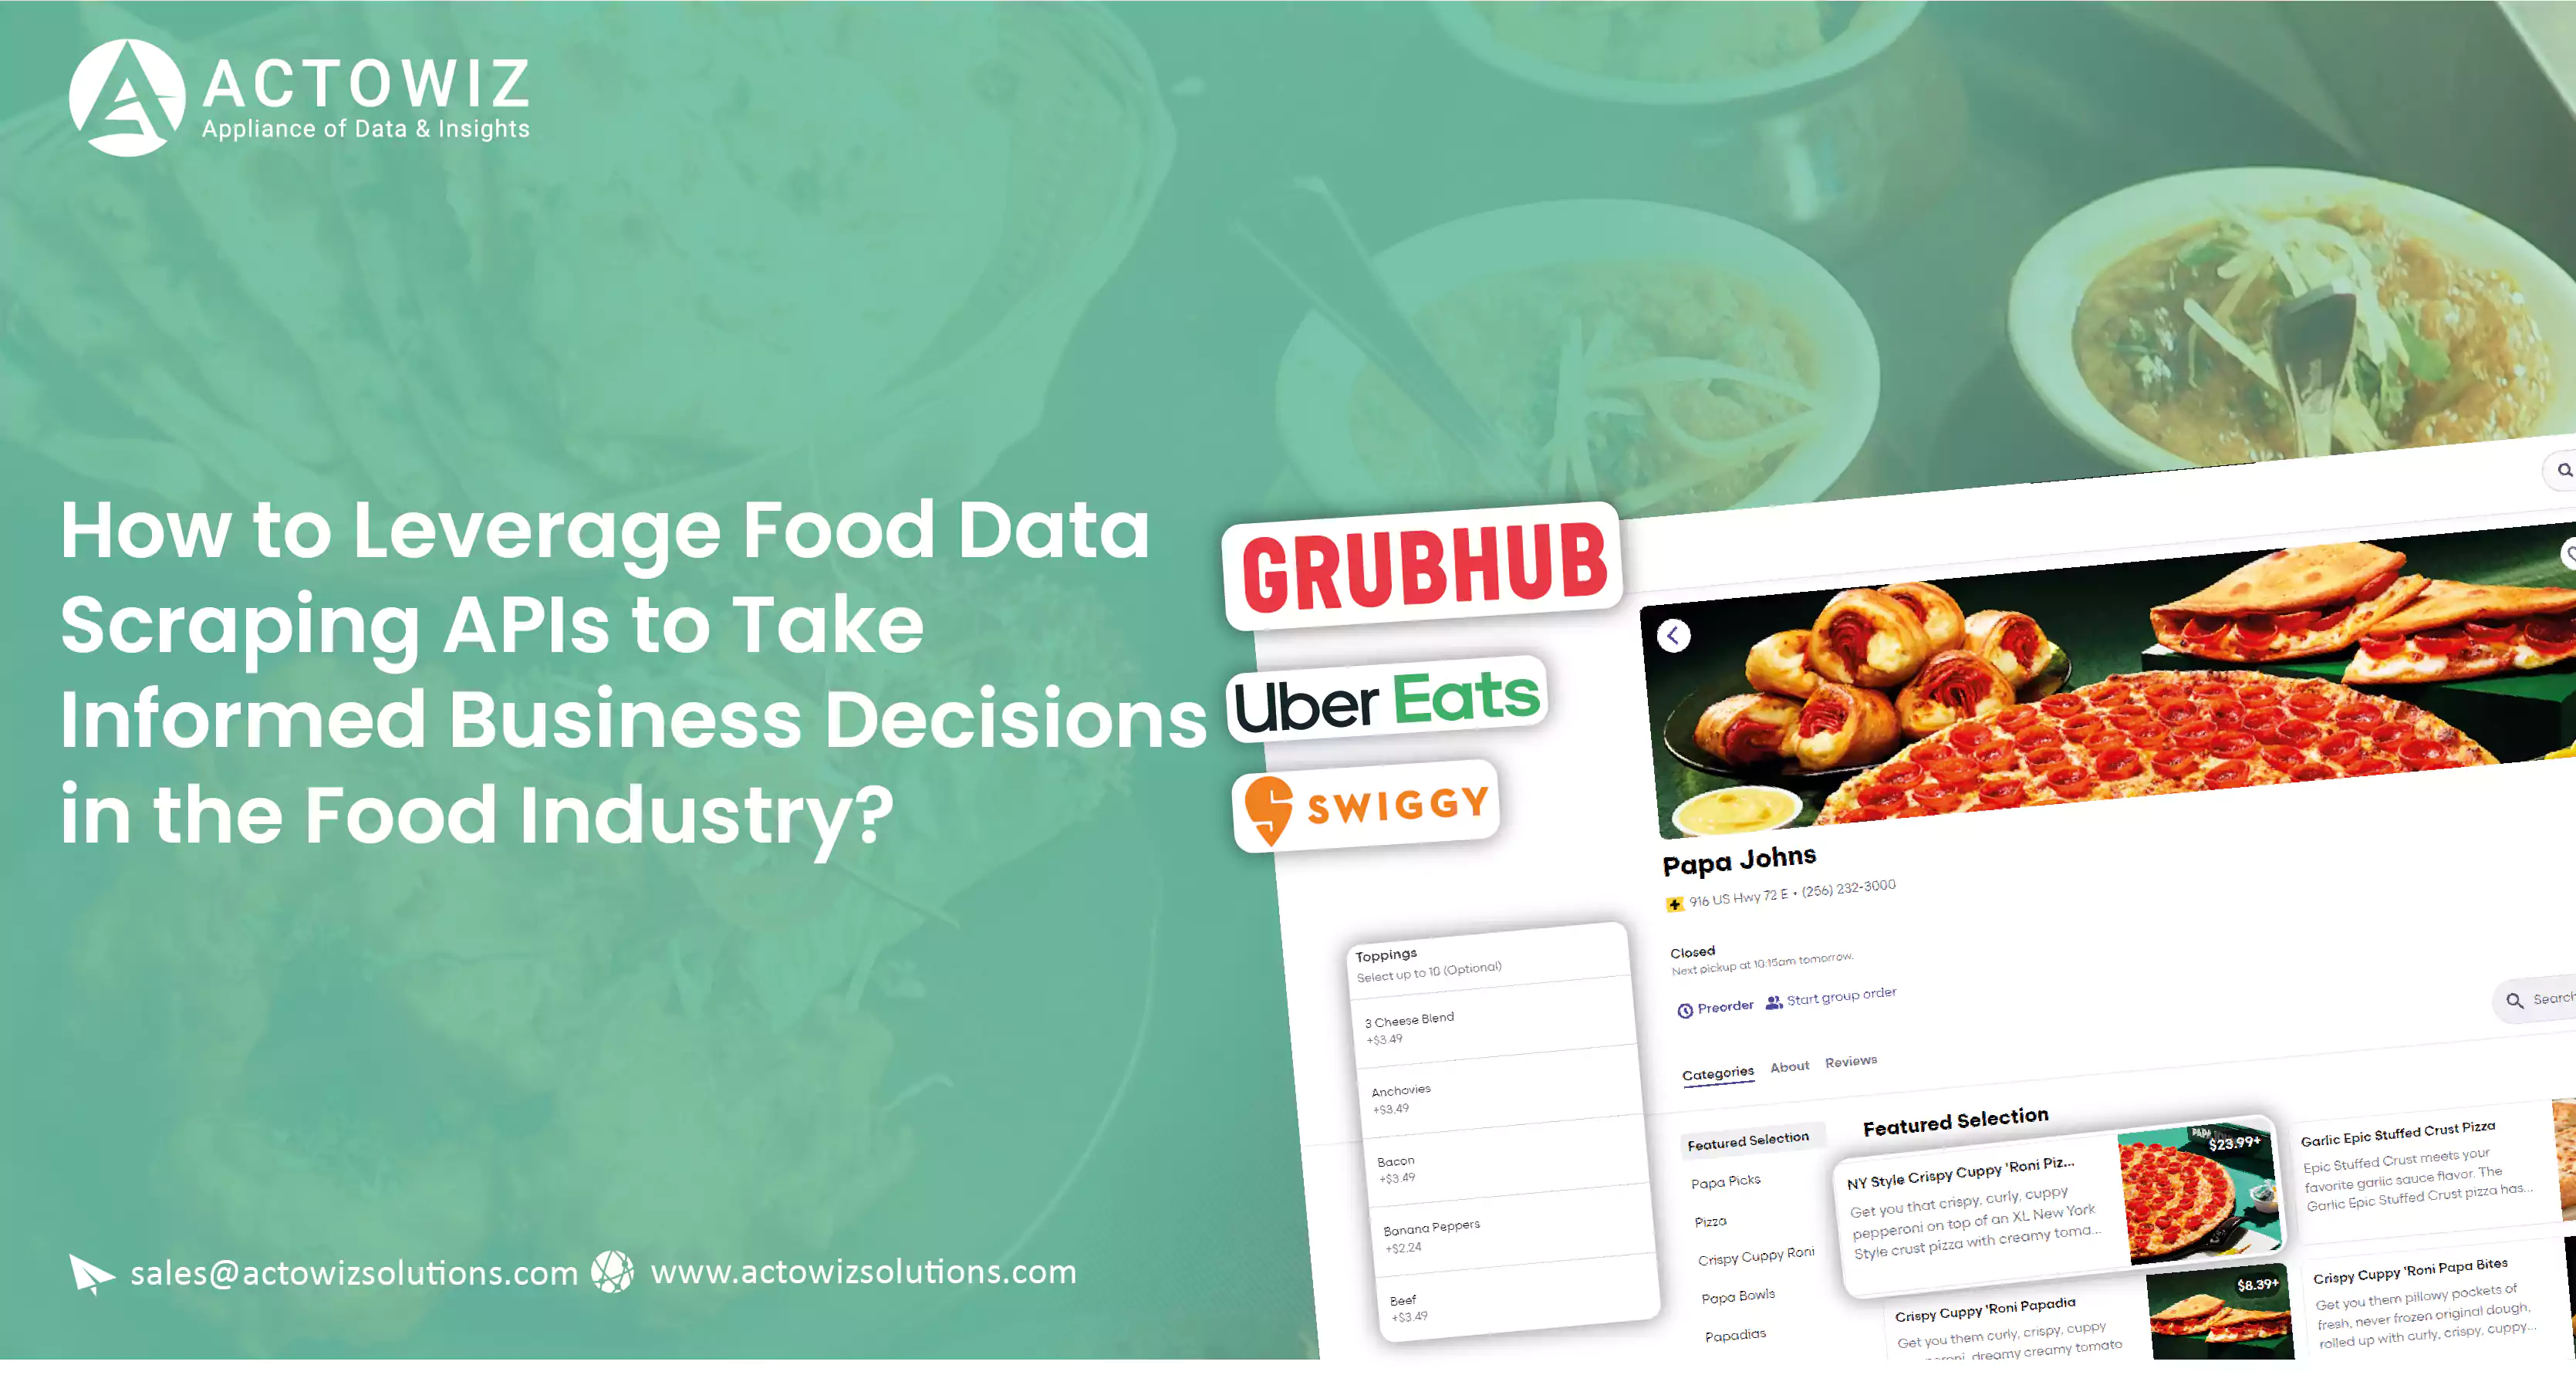 How to Leverage Food Data Scraping APIs to Take Informed Business Decisions in the Food Industry